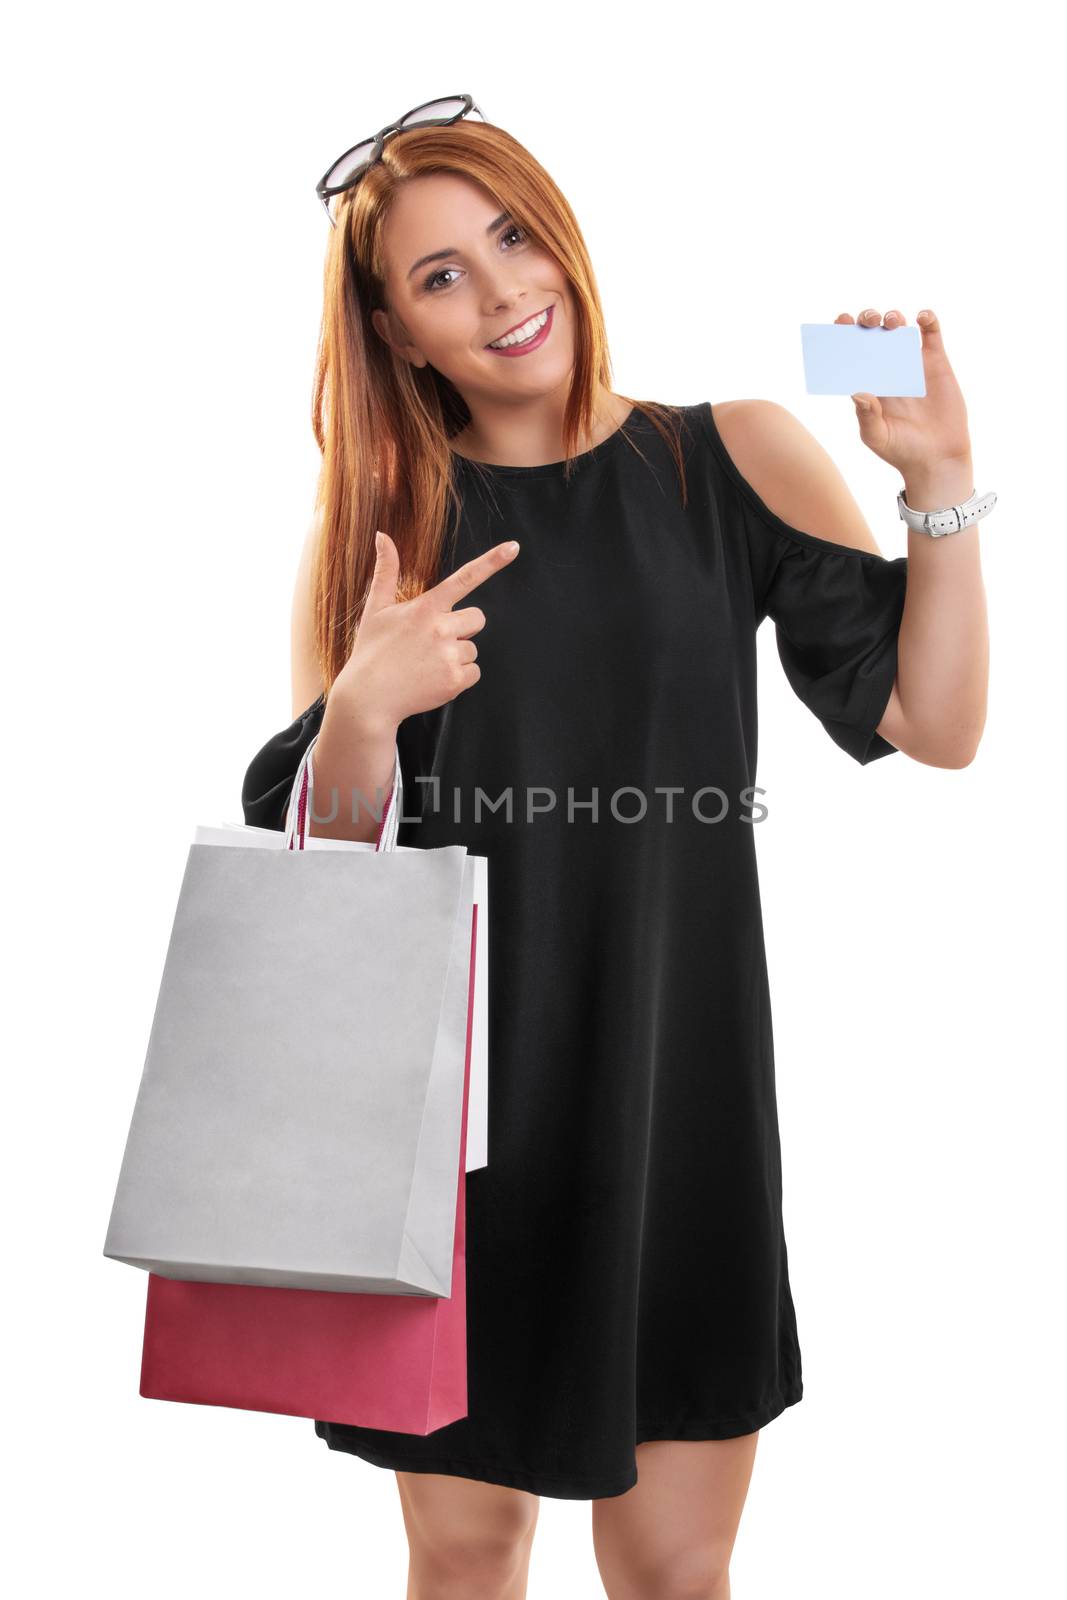 Portrait of a beautiful young girl in a stylish dress holing shopping bags and pointing to a blank card, isolated on white background. Shopping concept, copy space.